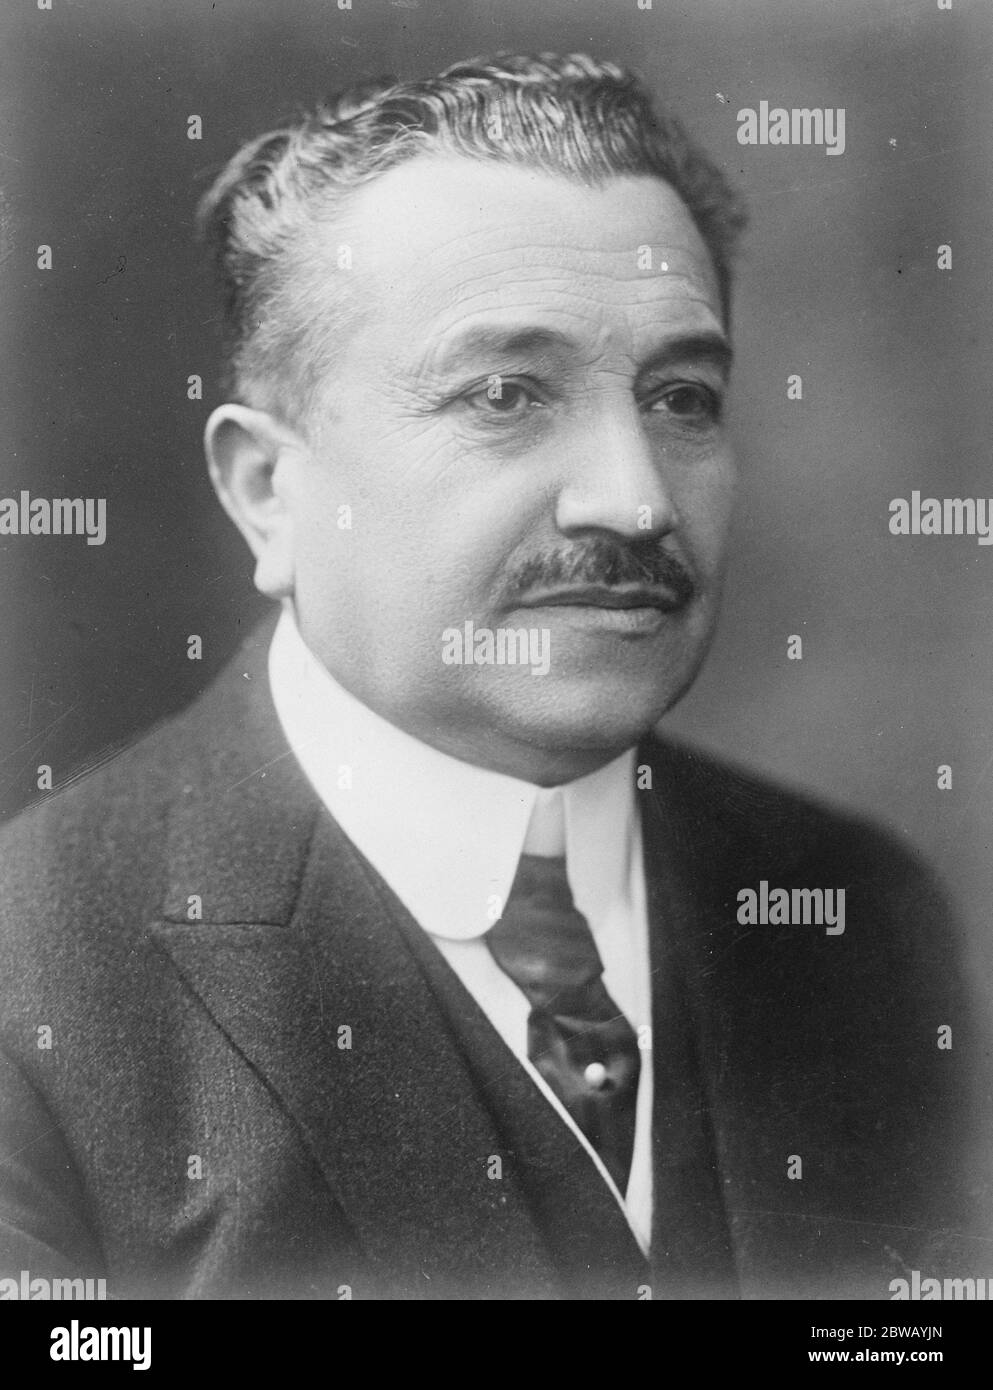 French Labour Minister to help small craftsmen . M Peyronnet , the French Minister of Labour , who is making an effort to revive in France the prosperity of small craftsmen . He has submitted to the President a prosposal which contemplates loans to individual craftsmen formed to purchase raw materials and tools . 30 December 1922 Stock Photo